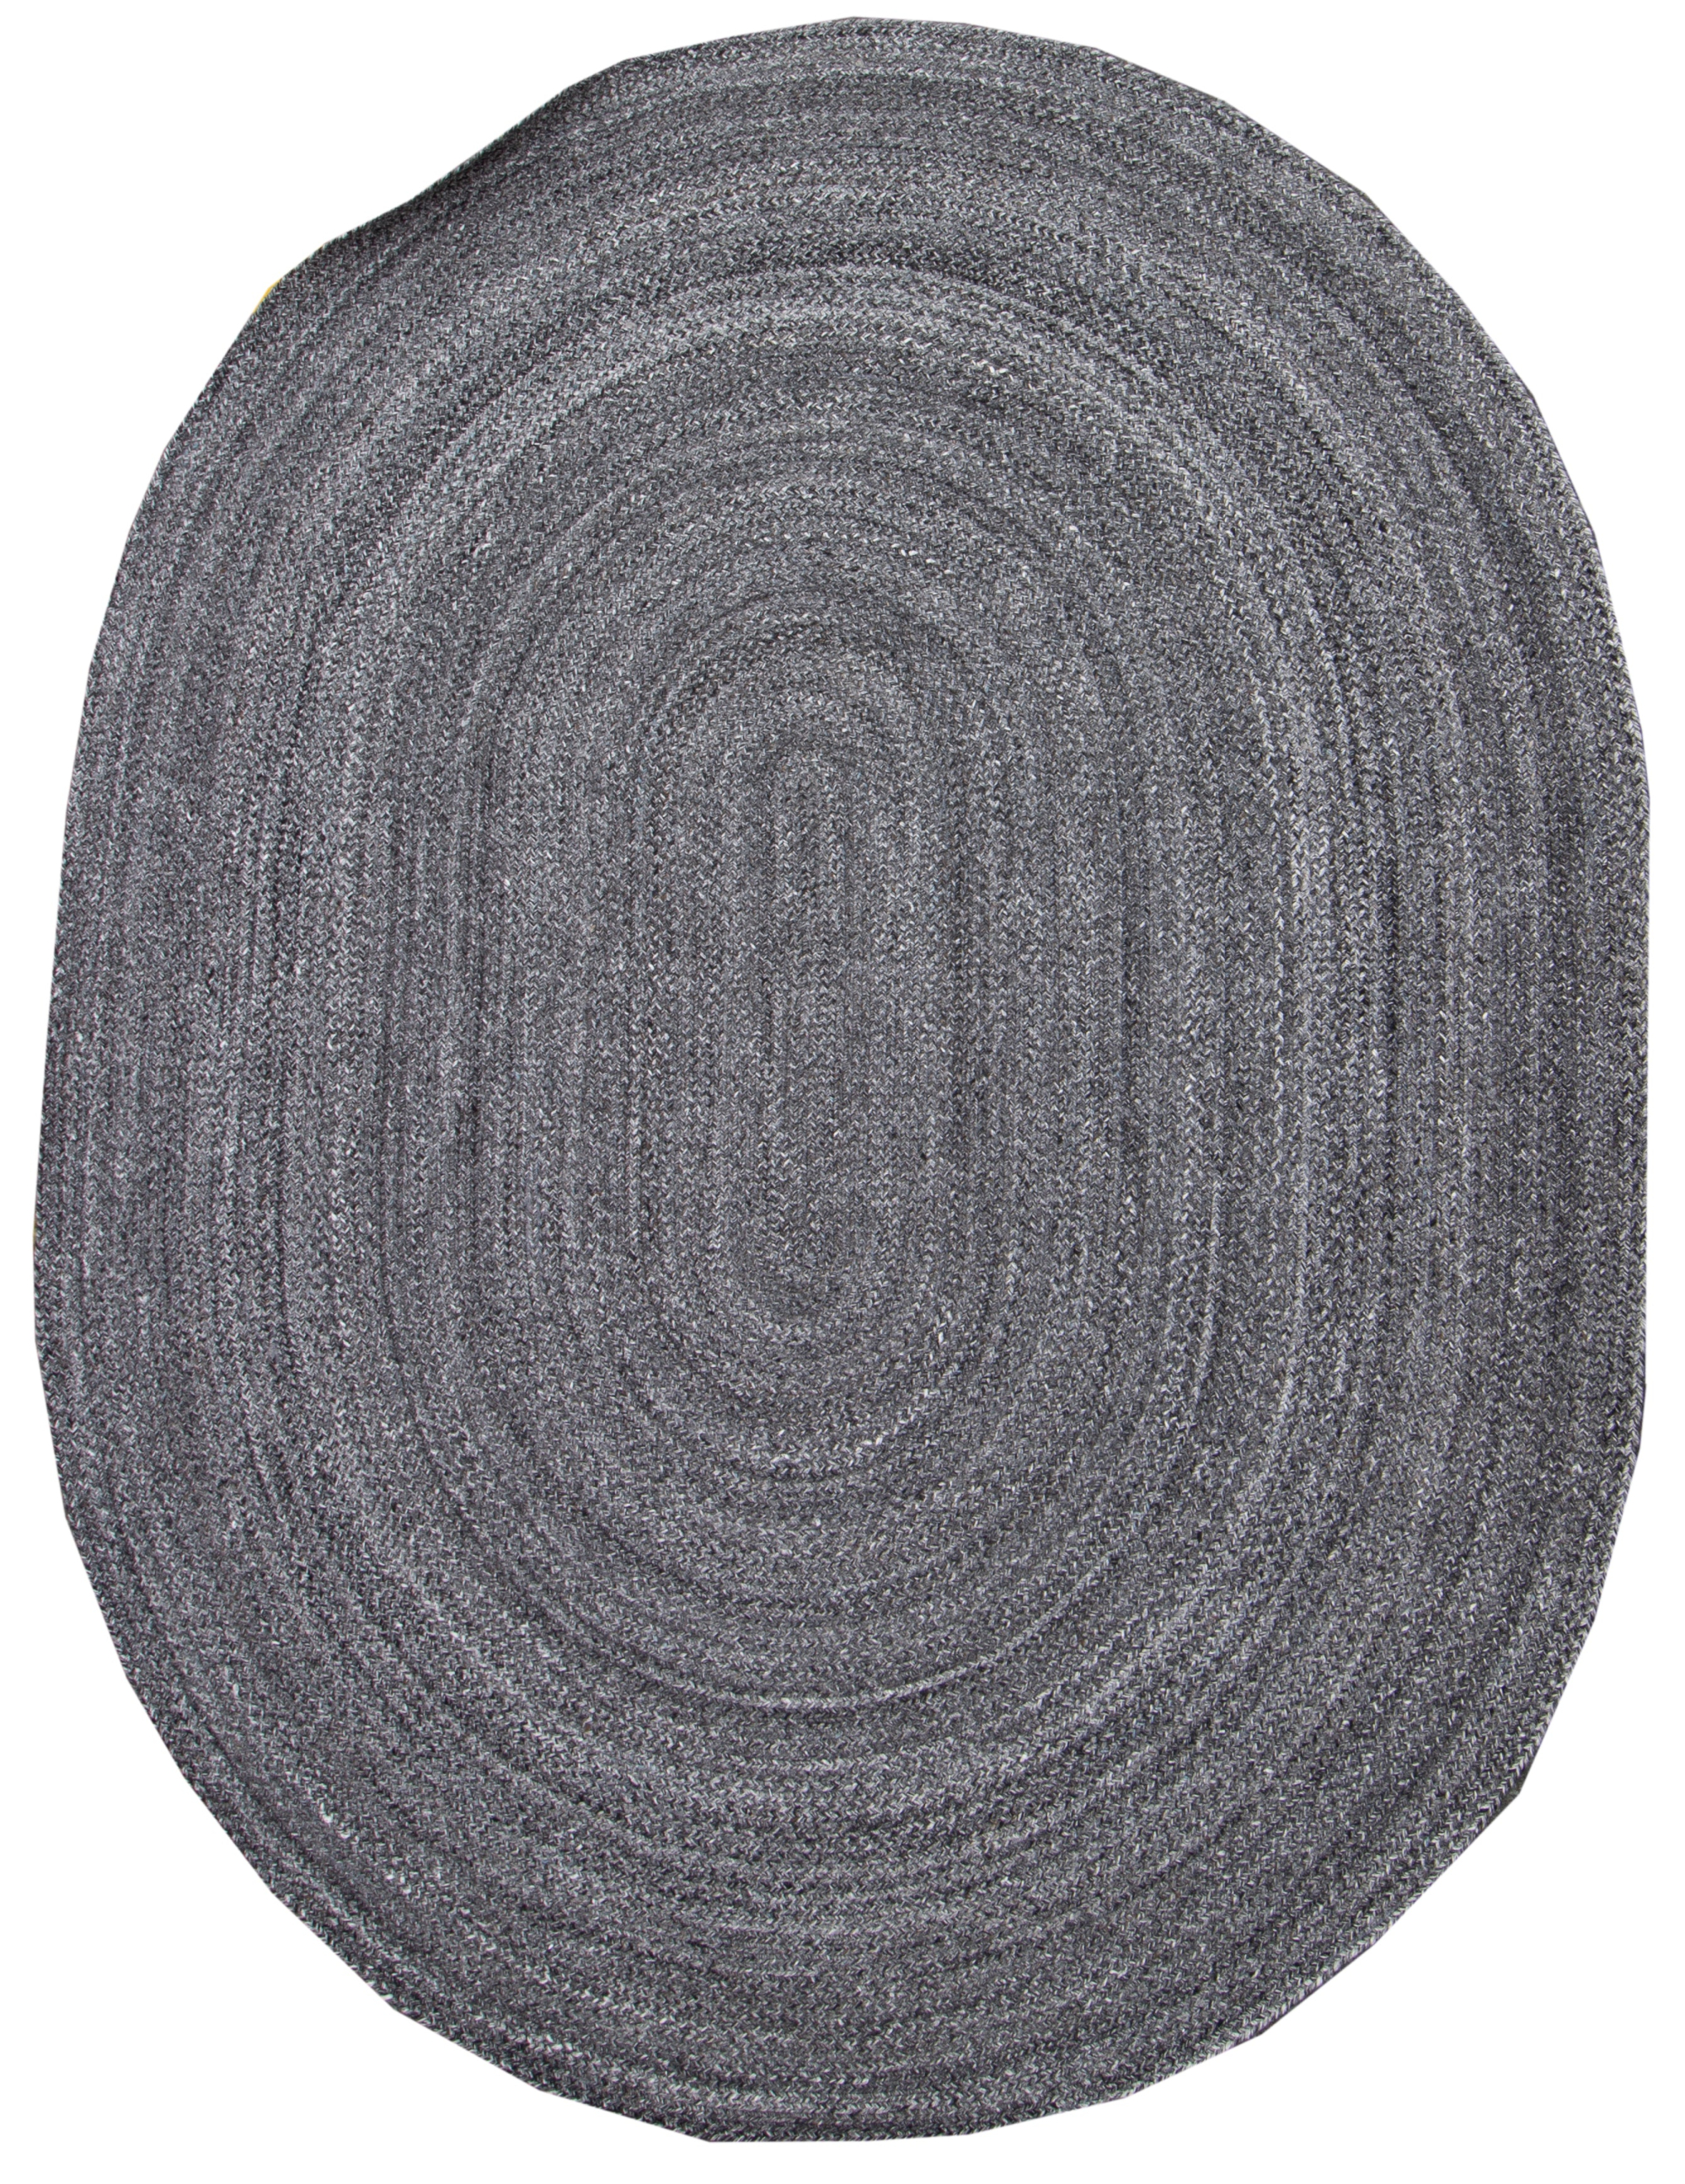 PYR1 Charcoal Braided Oval Rug-Area rug for living room, dining area, and bedroom